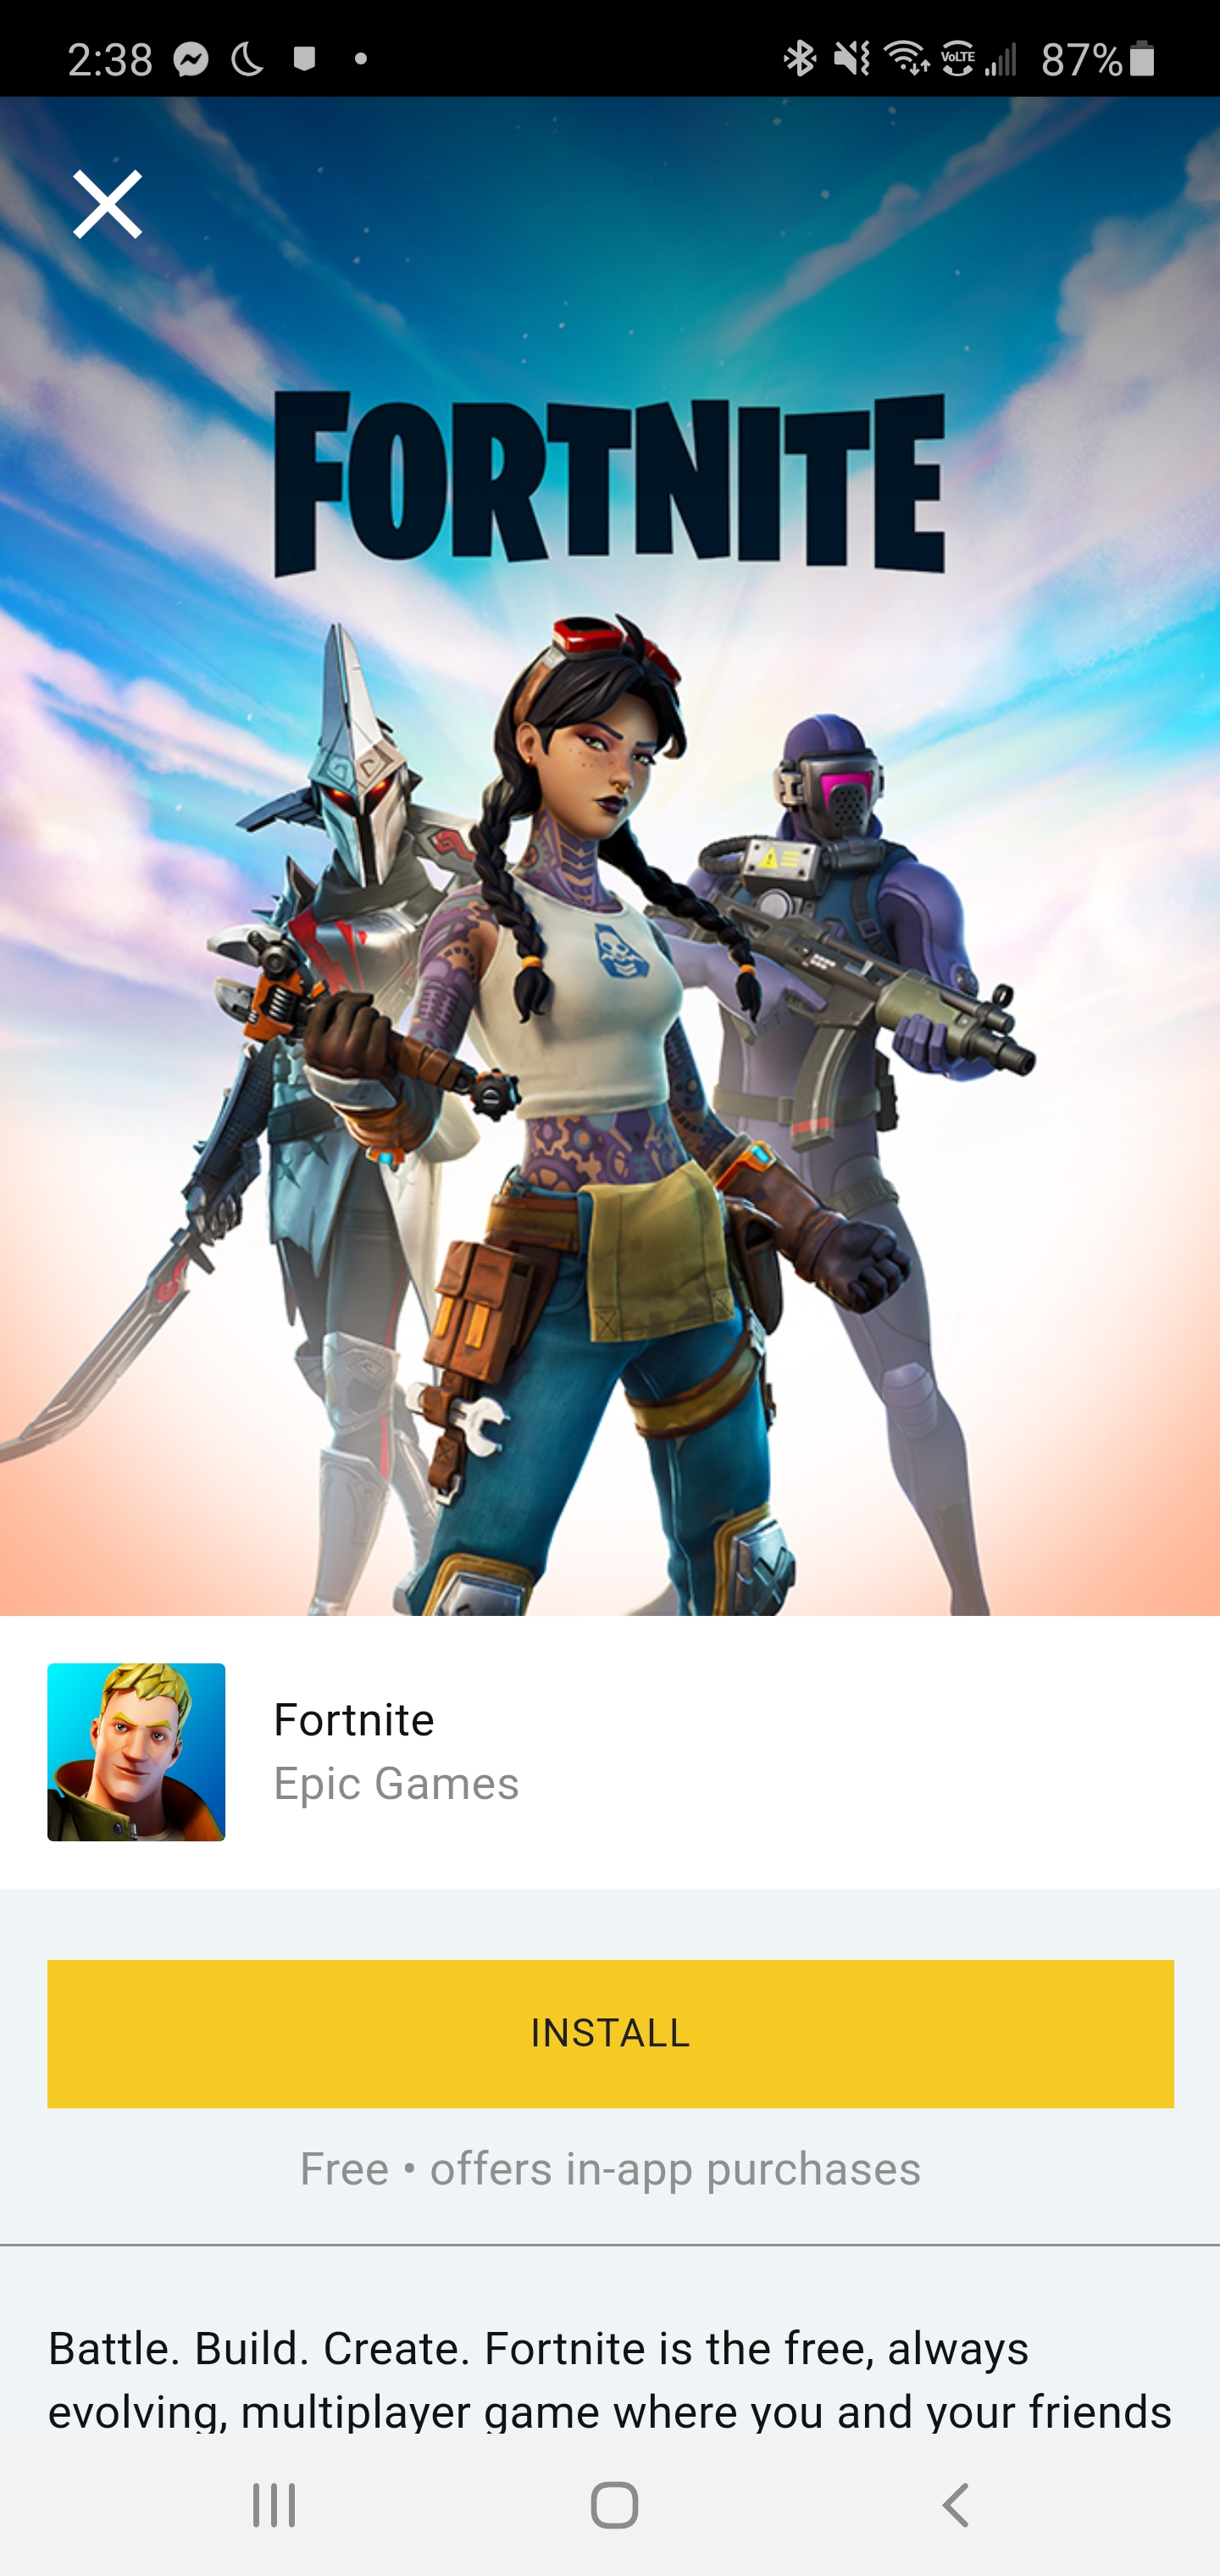 How to play Fortnite without the Epic Games launcher